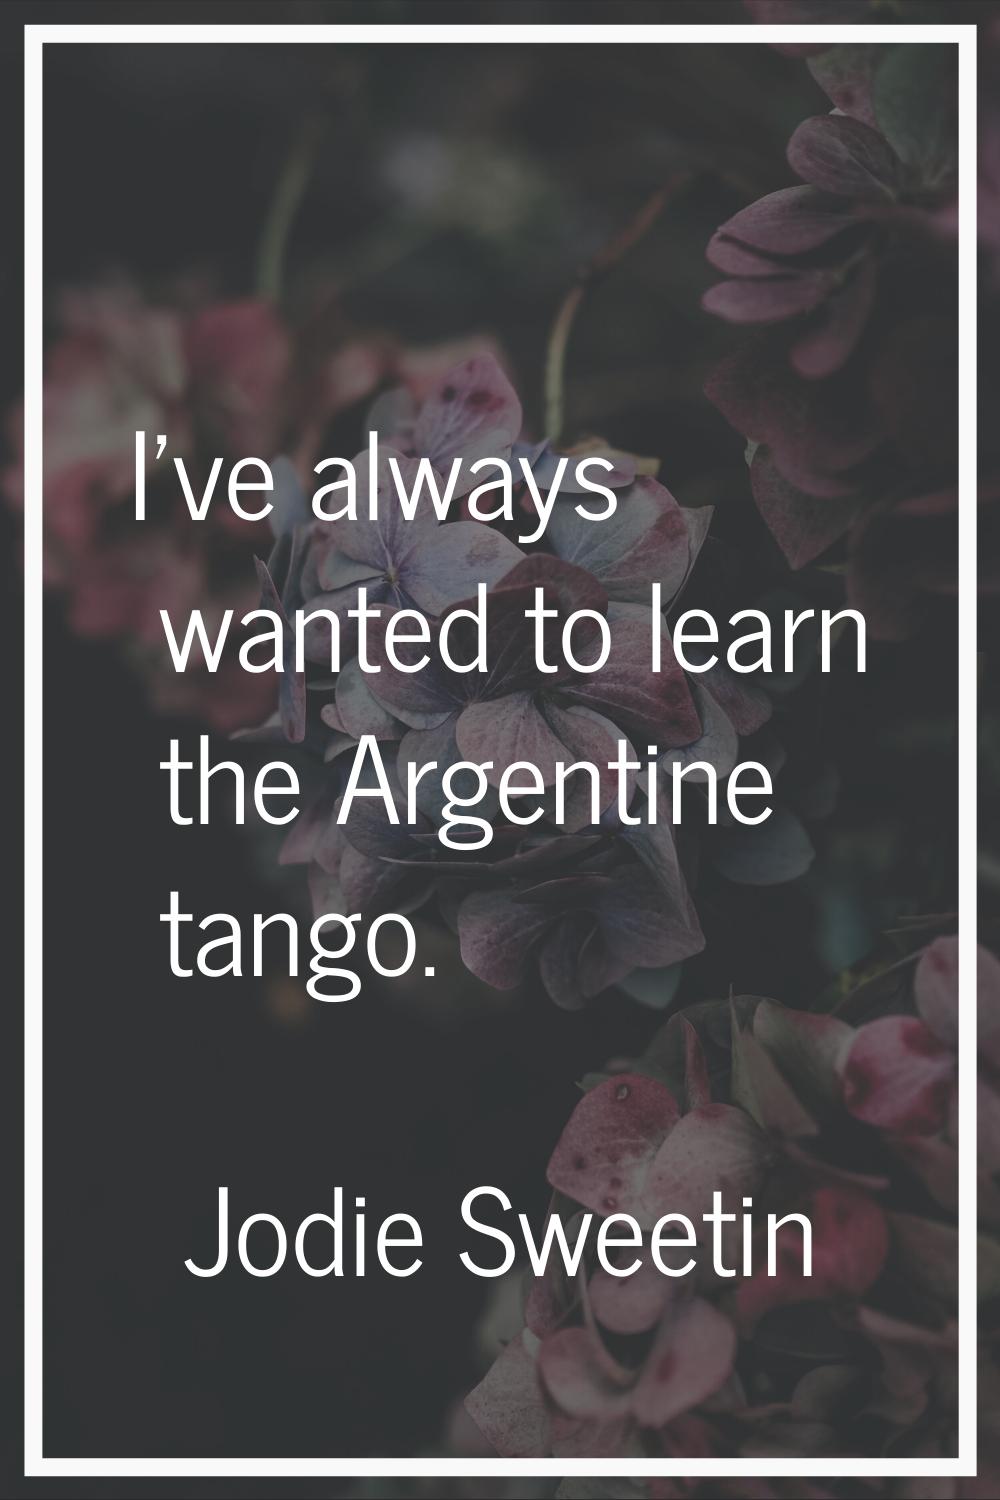 I've always wanted to learn the Argentine tango.